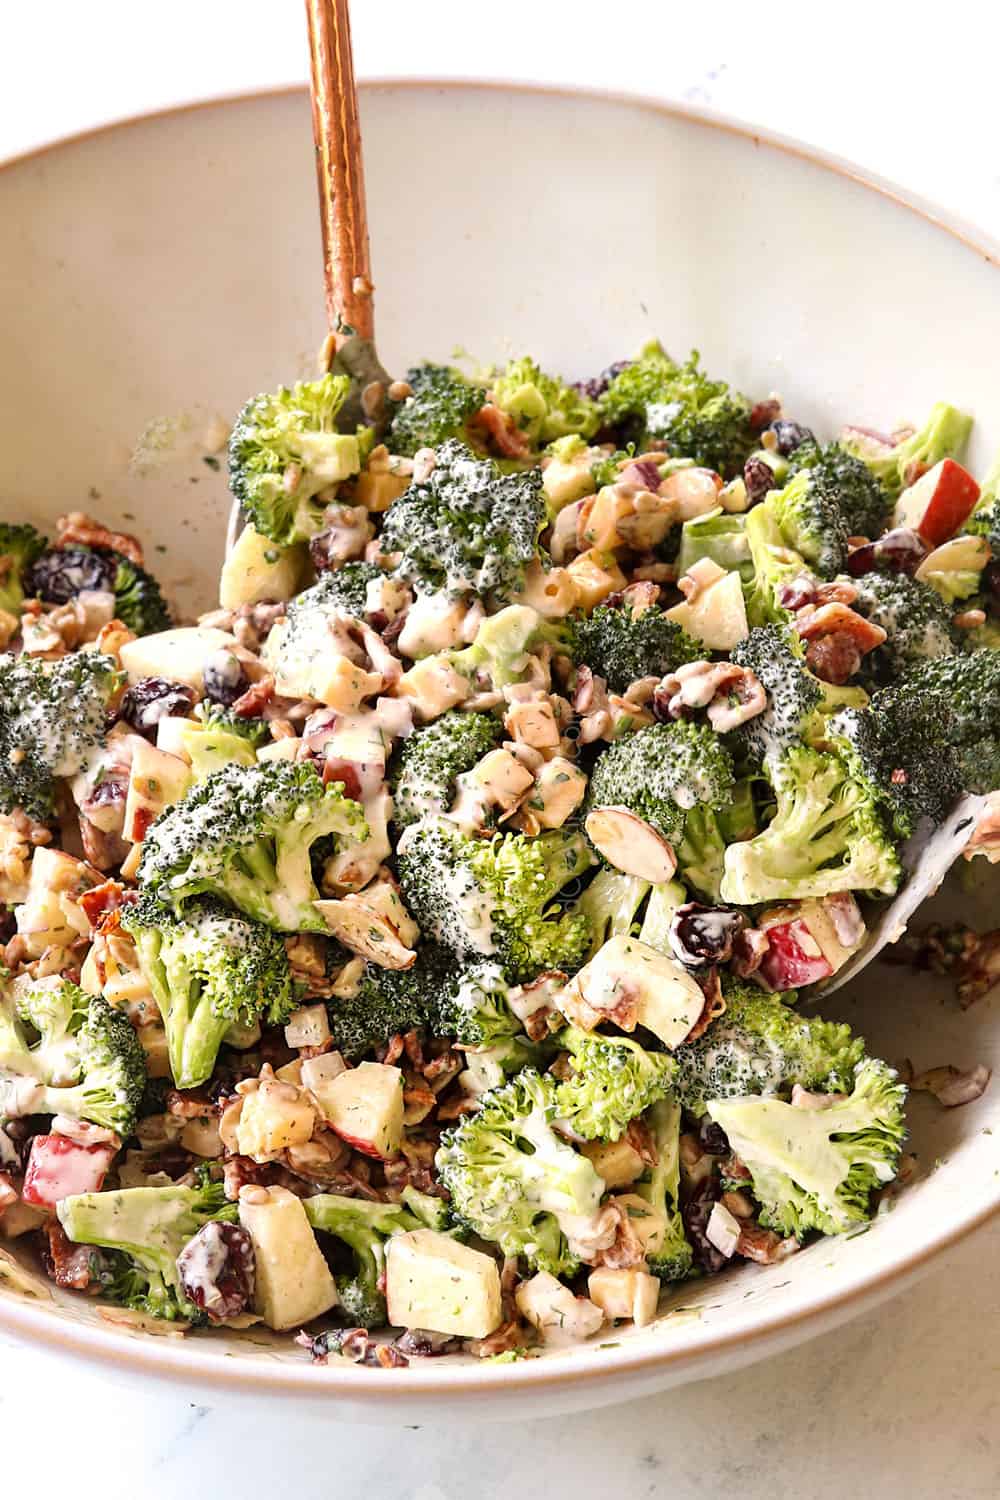  showing how to make best broccoli  salad recipe by tossing the broccoli bacon, cheese and apples with the dressing 